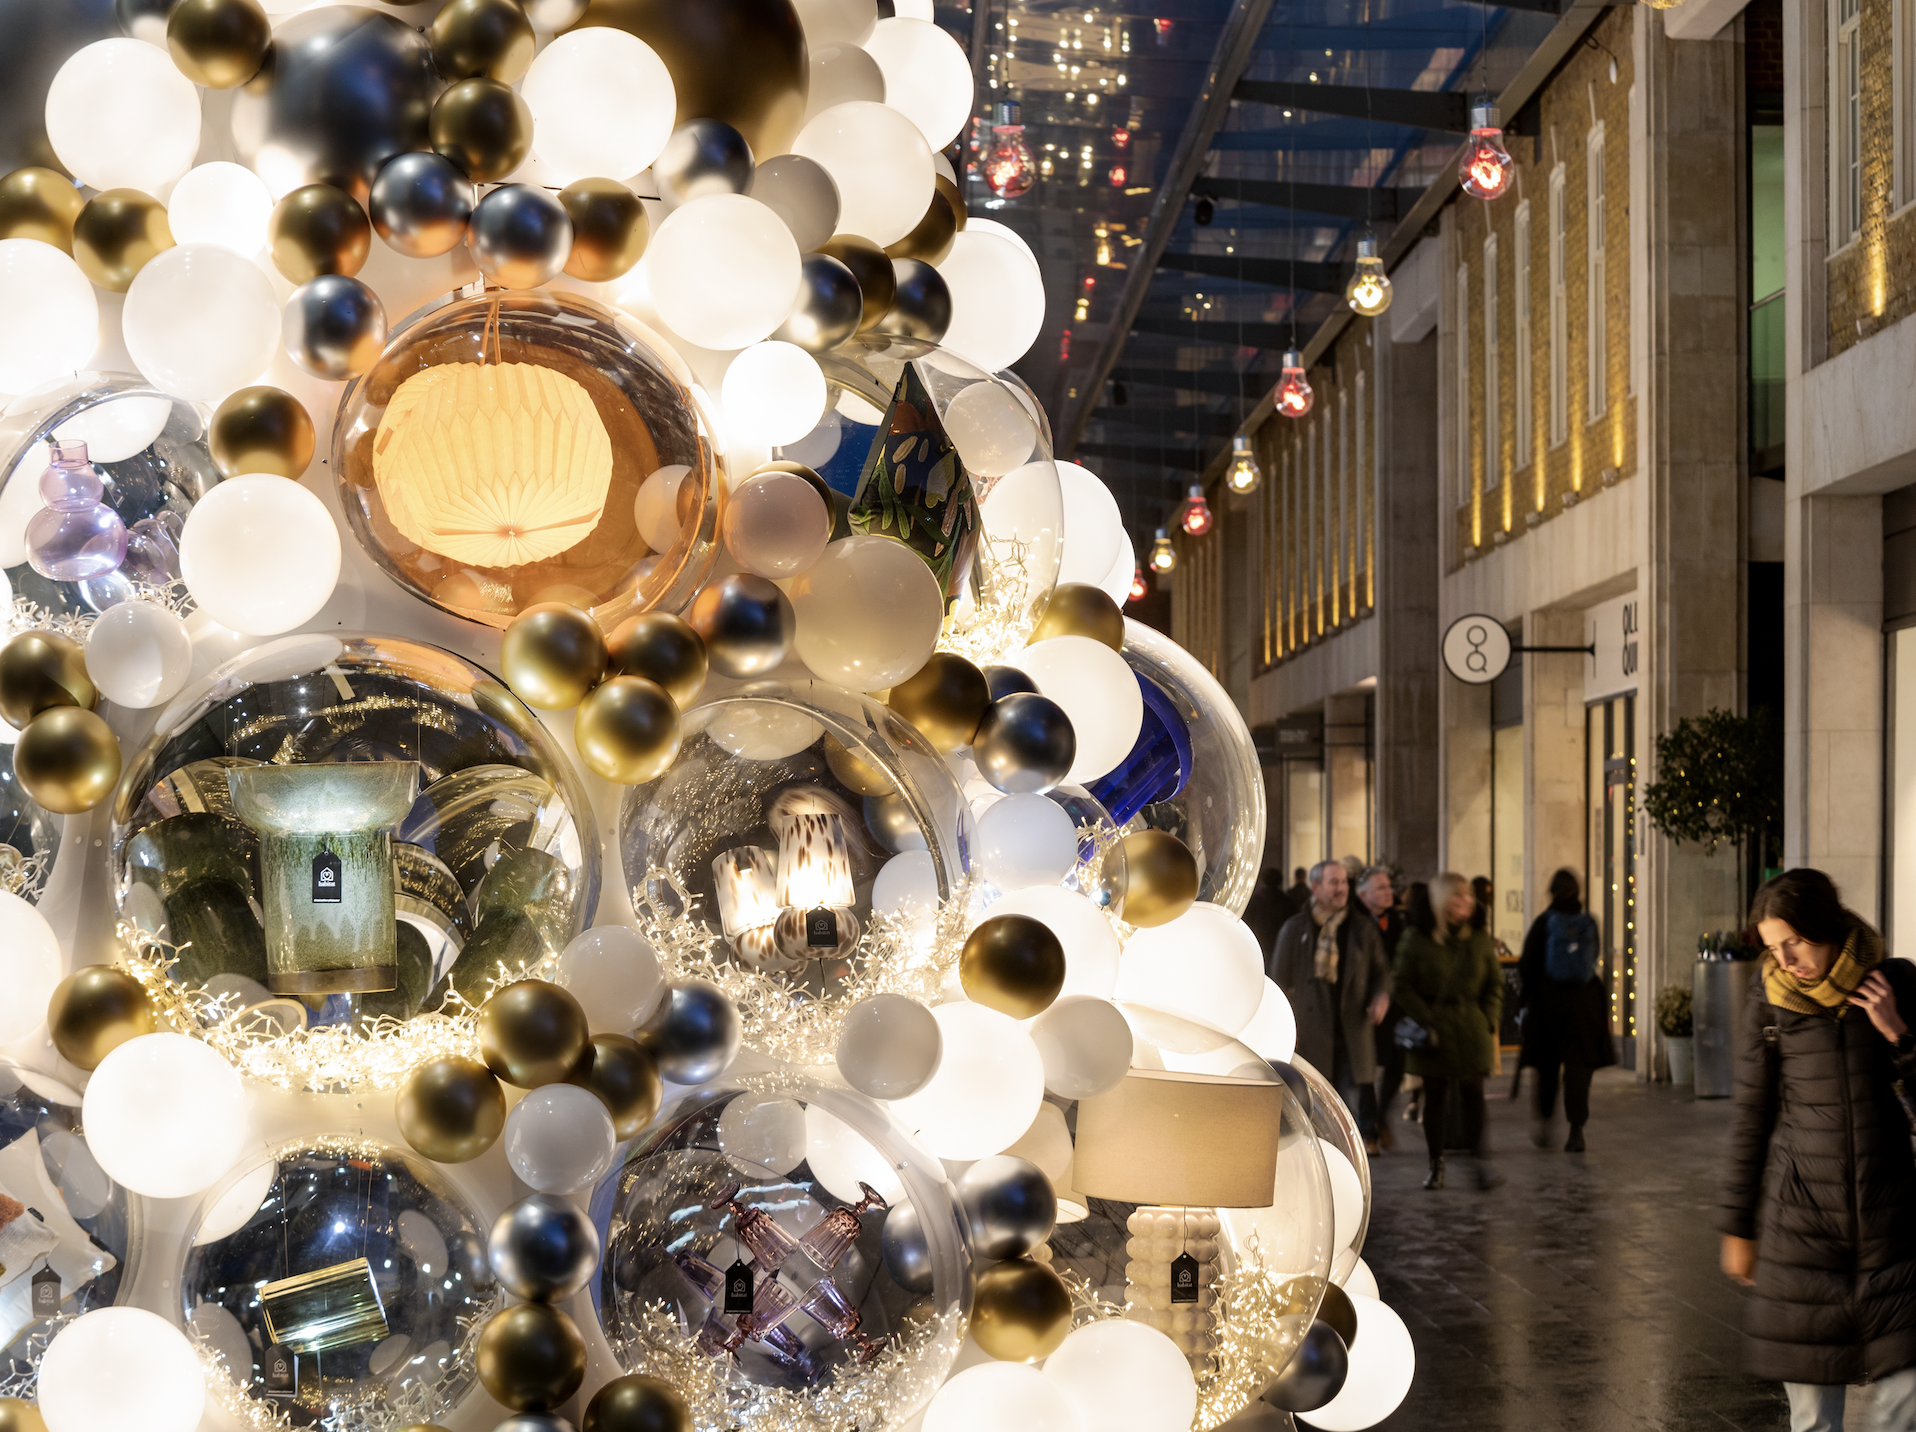 Visitors admire a silver, gold and white Christmas tree at Spitalfields Market, under new permanent lights installed by We Are Placemaking. The permanent lights are an example of how developers and visitors can benefit from cap-ex and permanent placemaking installations.